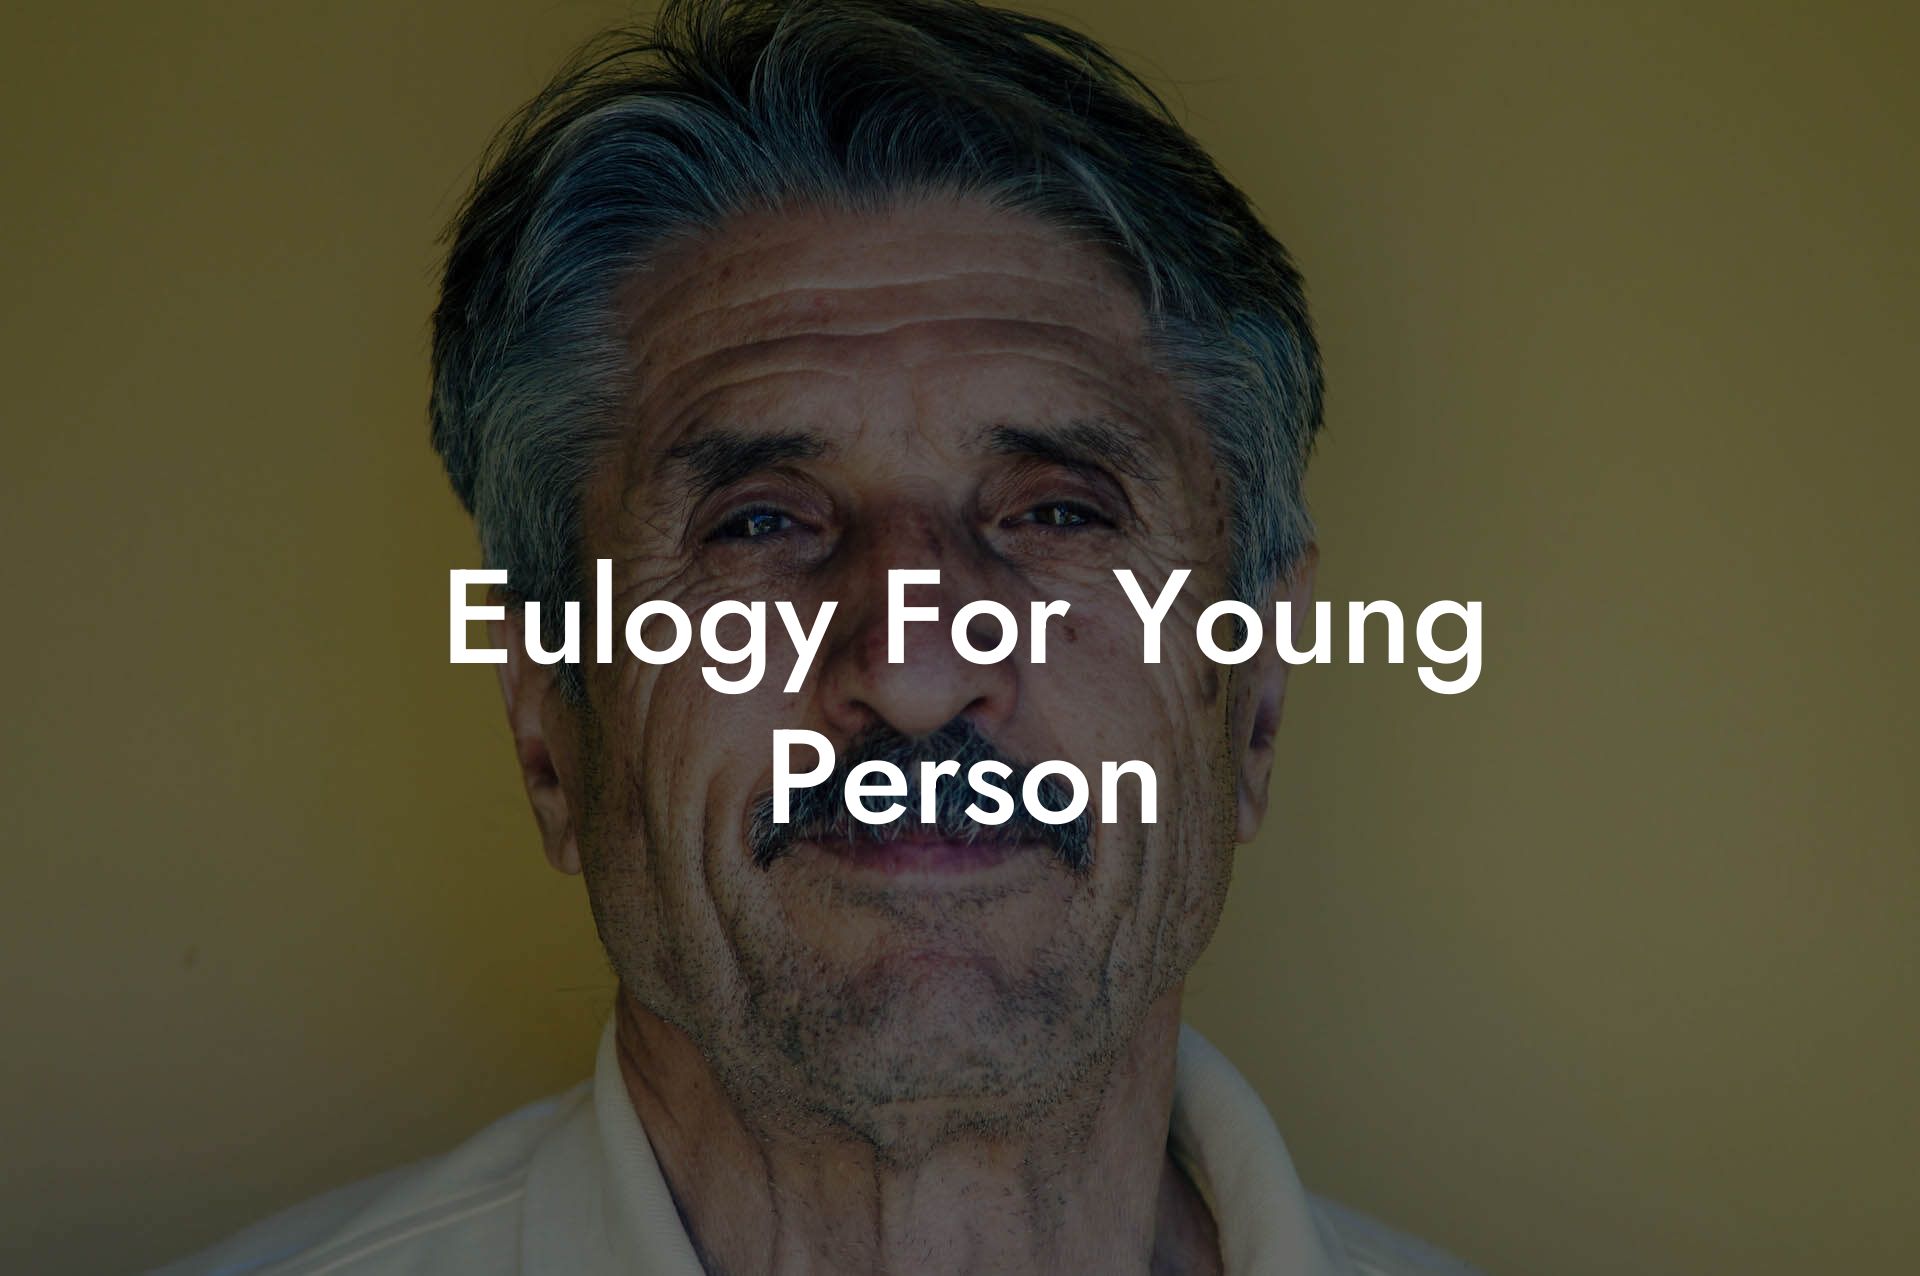 Eulogy For Young Person